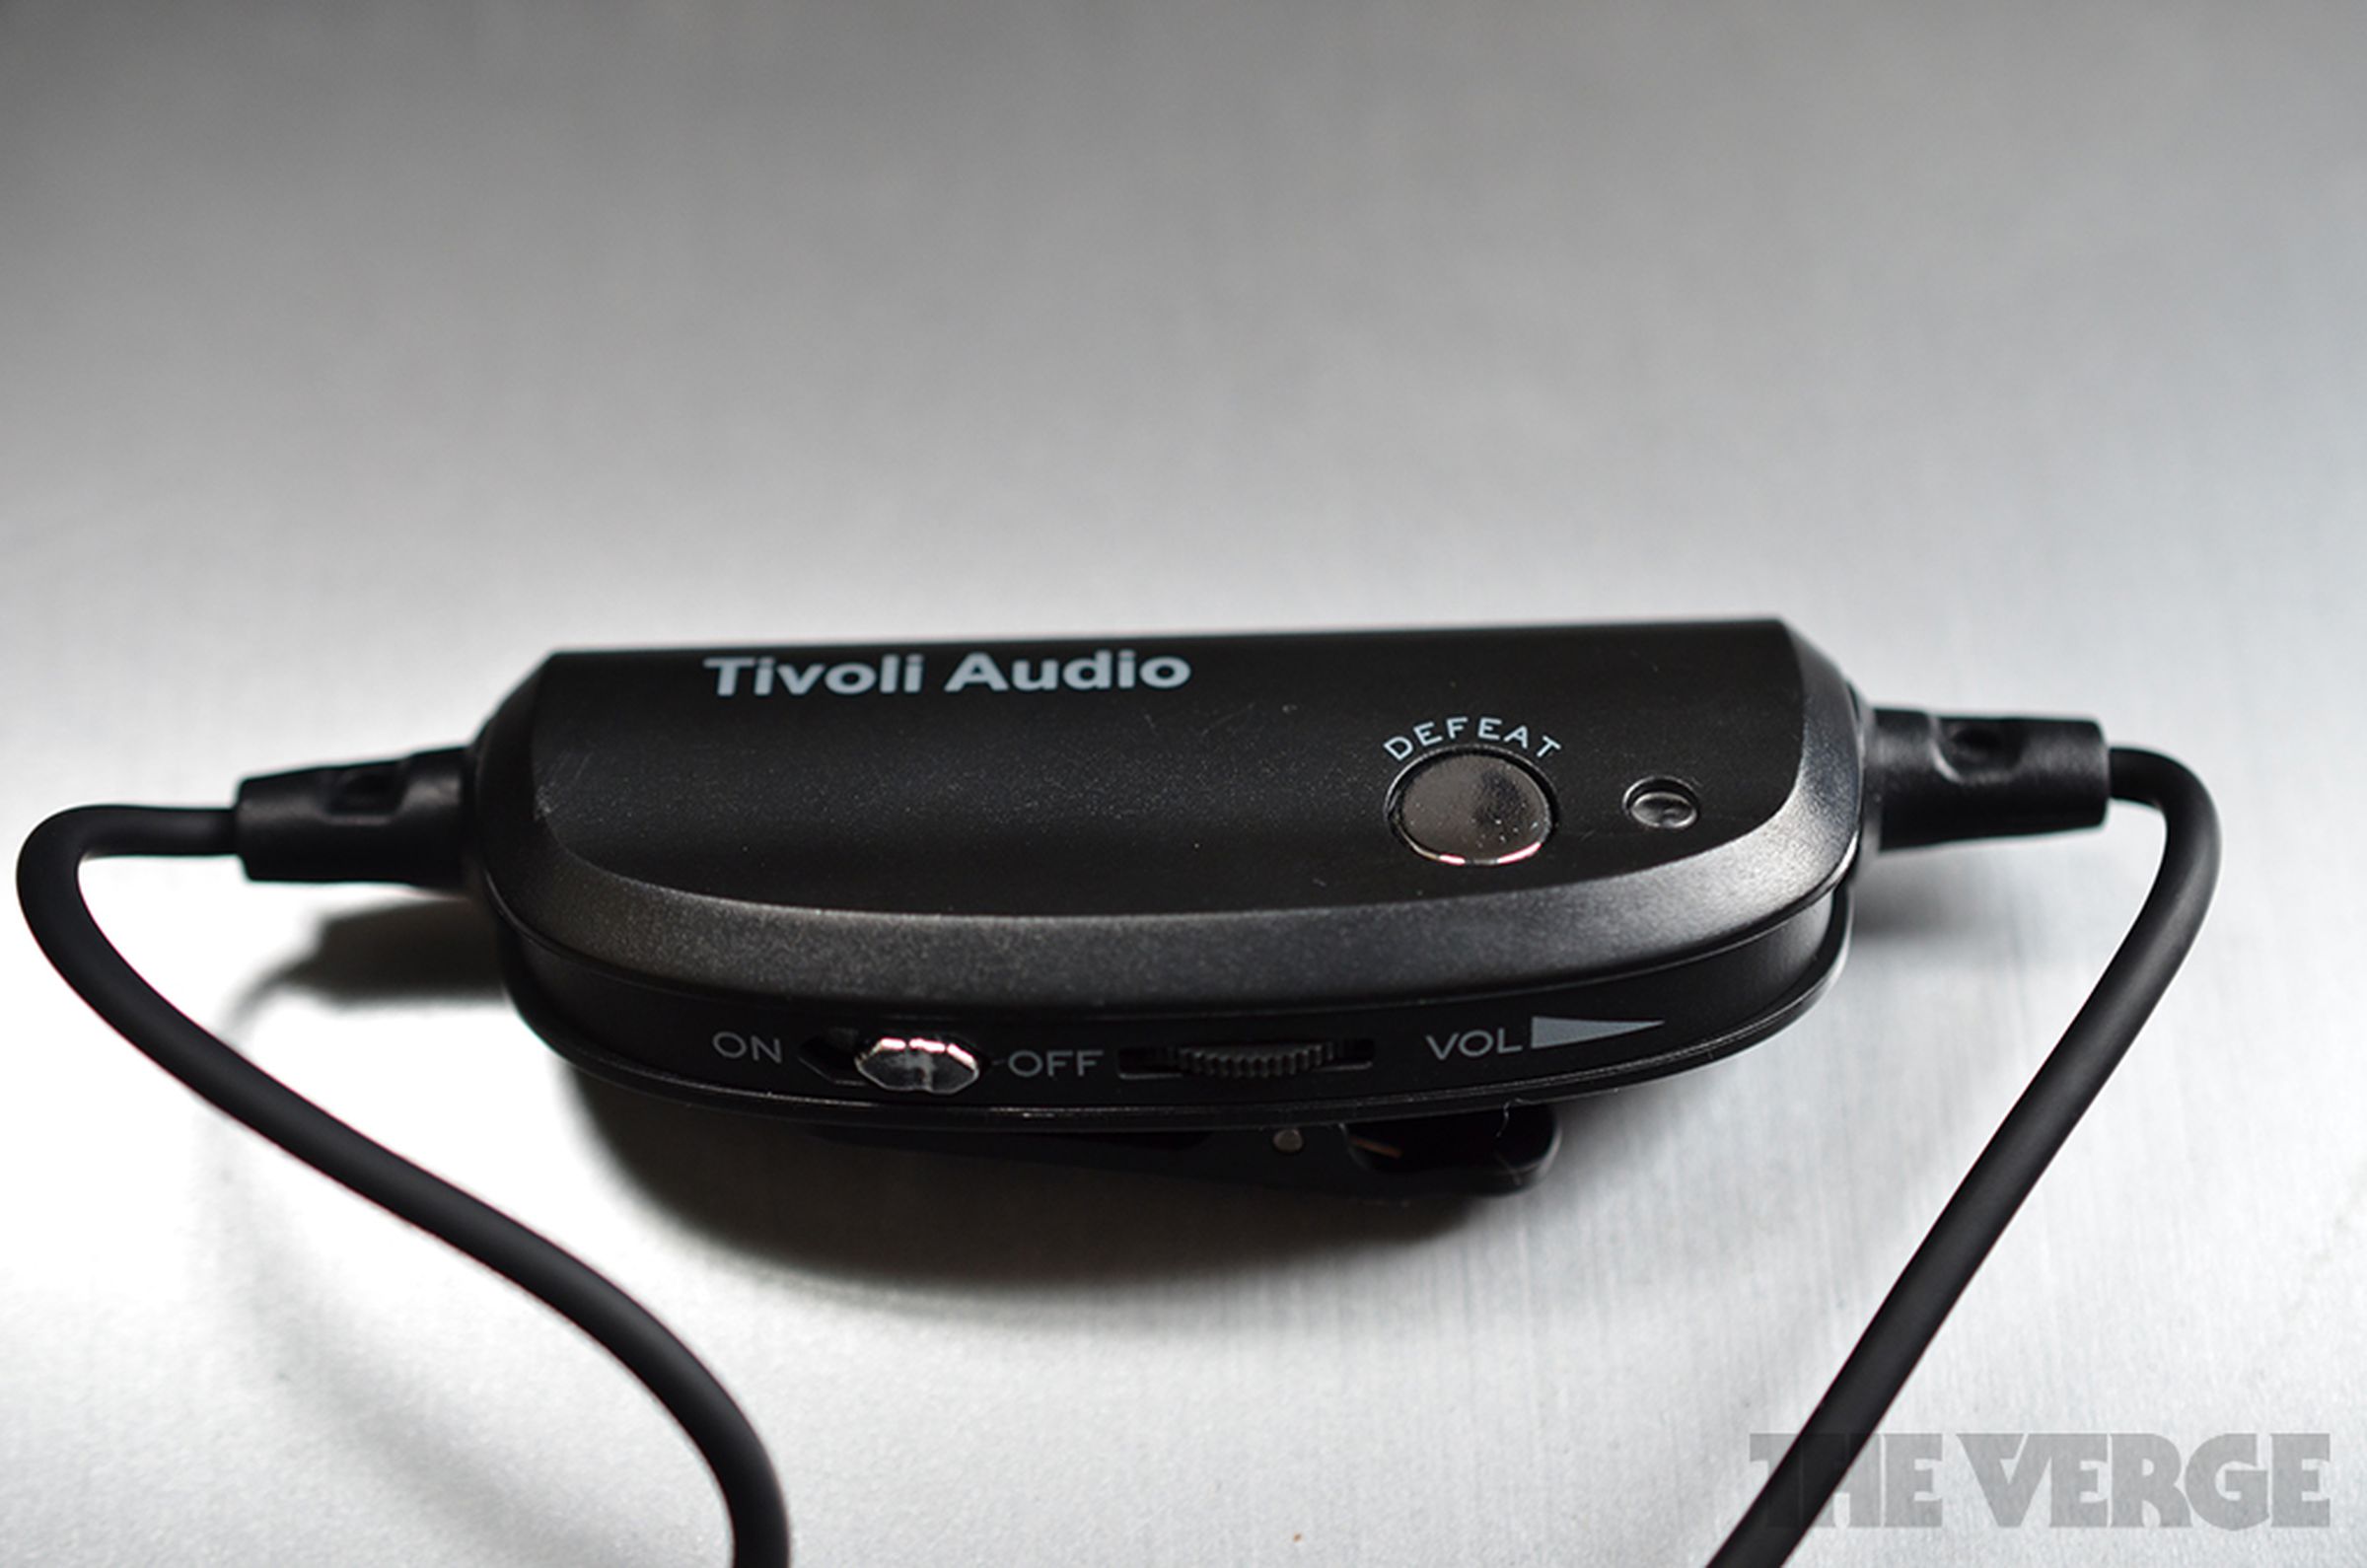 Tivoli Radio Silenz, Model One BT, PAL BT, and Blu Con hands-on pictures